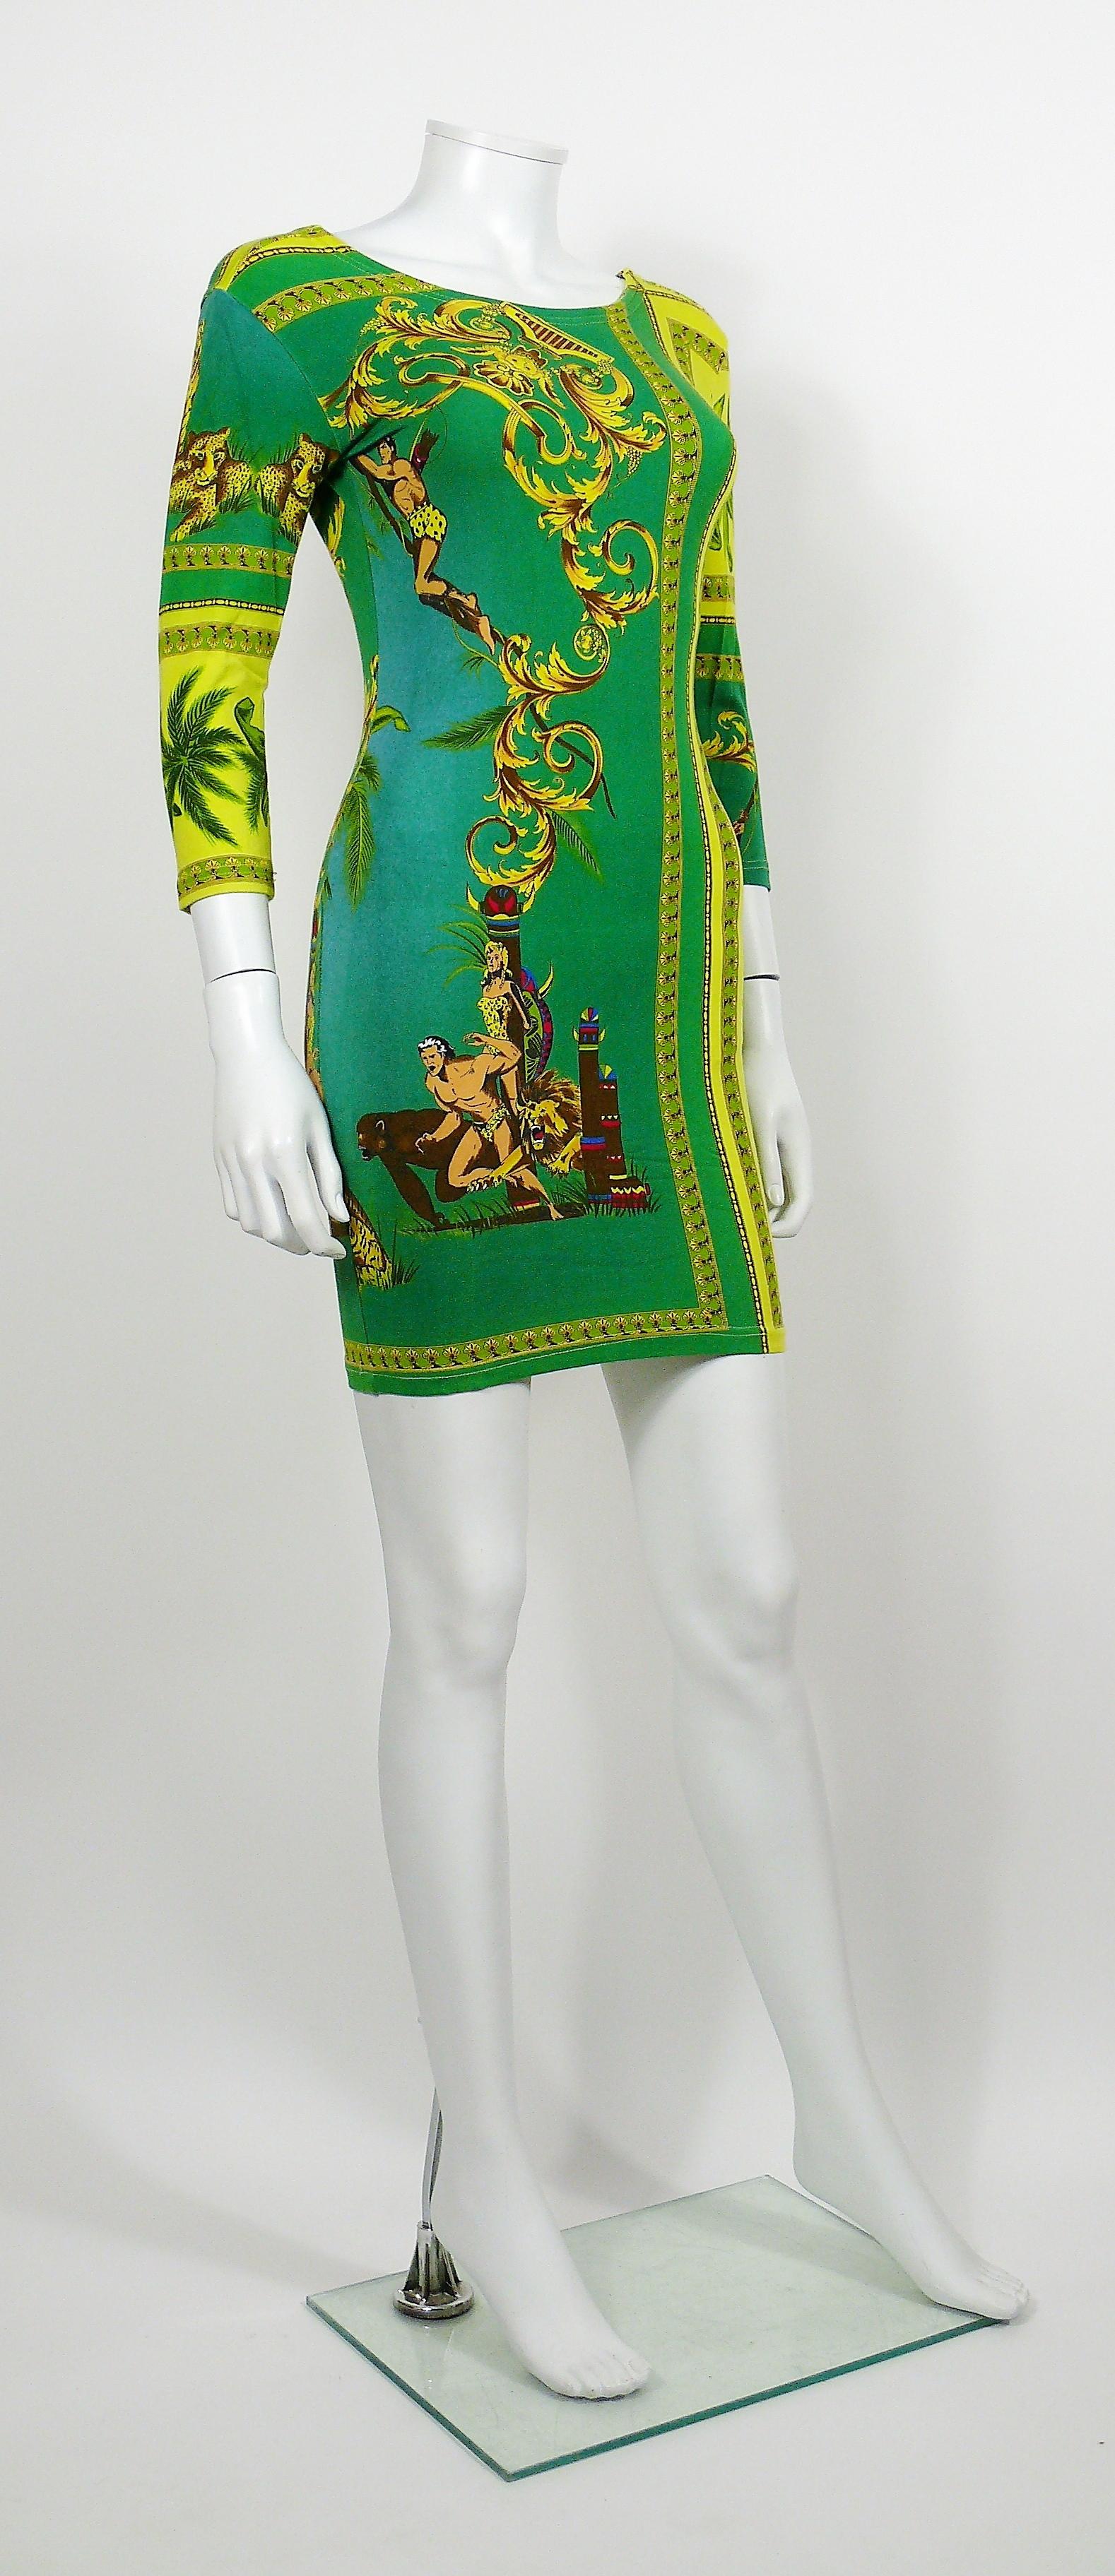 VERSACE JEANS COUTURE vintage 1990s rare bodycon dress featuring a TARZAN and JANE, jungle and tropical vibrant print.

Slips on.
Stretchy fabric.

Label reads VERSACE JEANS COUTURE.
Made in Italy.

Size tag reads : 30/44.
Please refer to